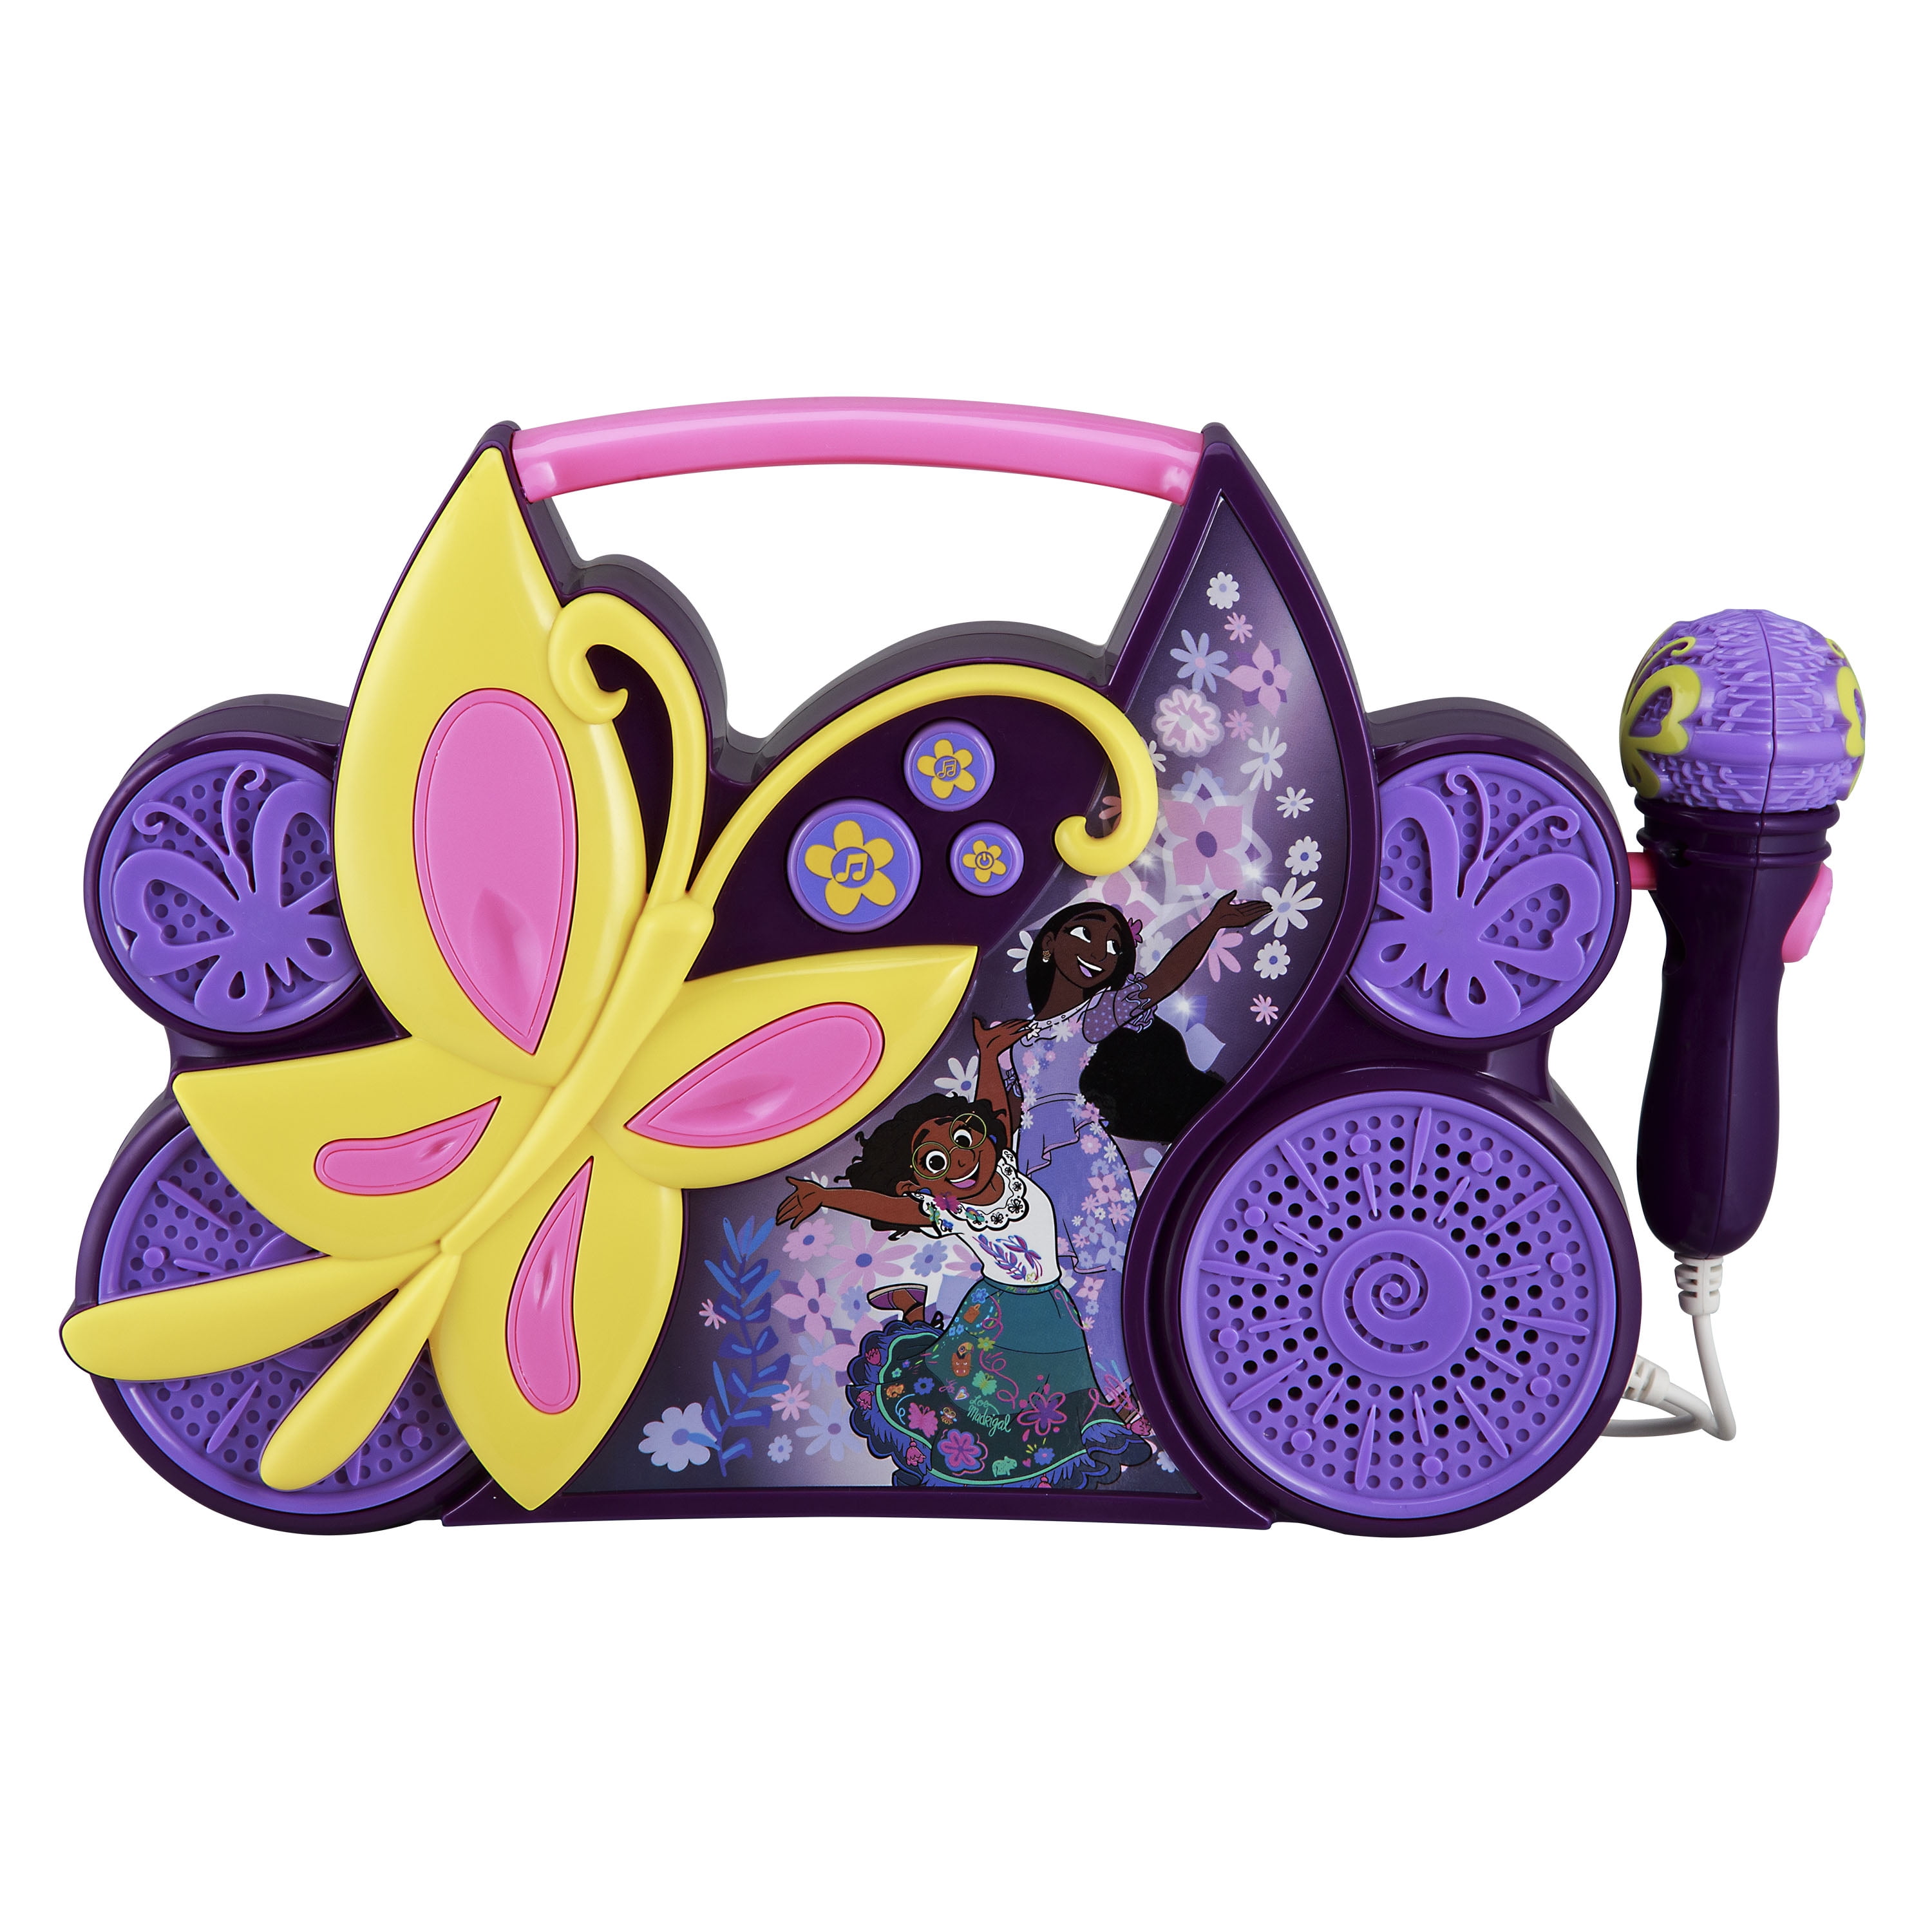 Disney Encanto Sing-Along Boombox with Real Working Microphone. Includes 2 Versions of the Hit Song "We Don't Talk About Bruno" (with and without lyrics)